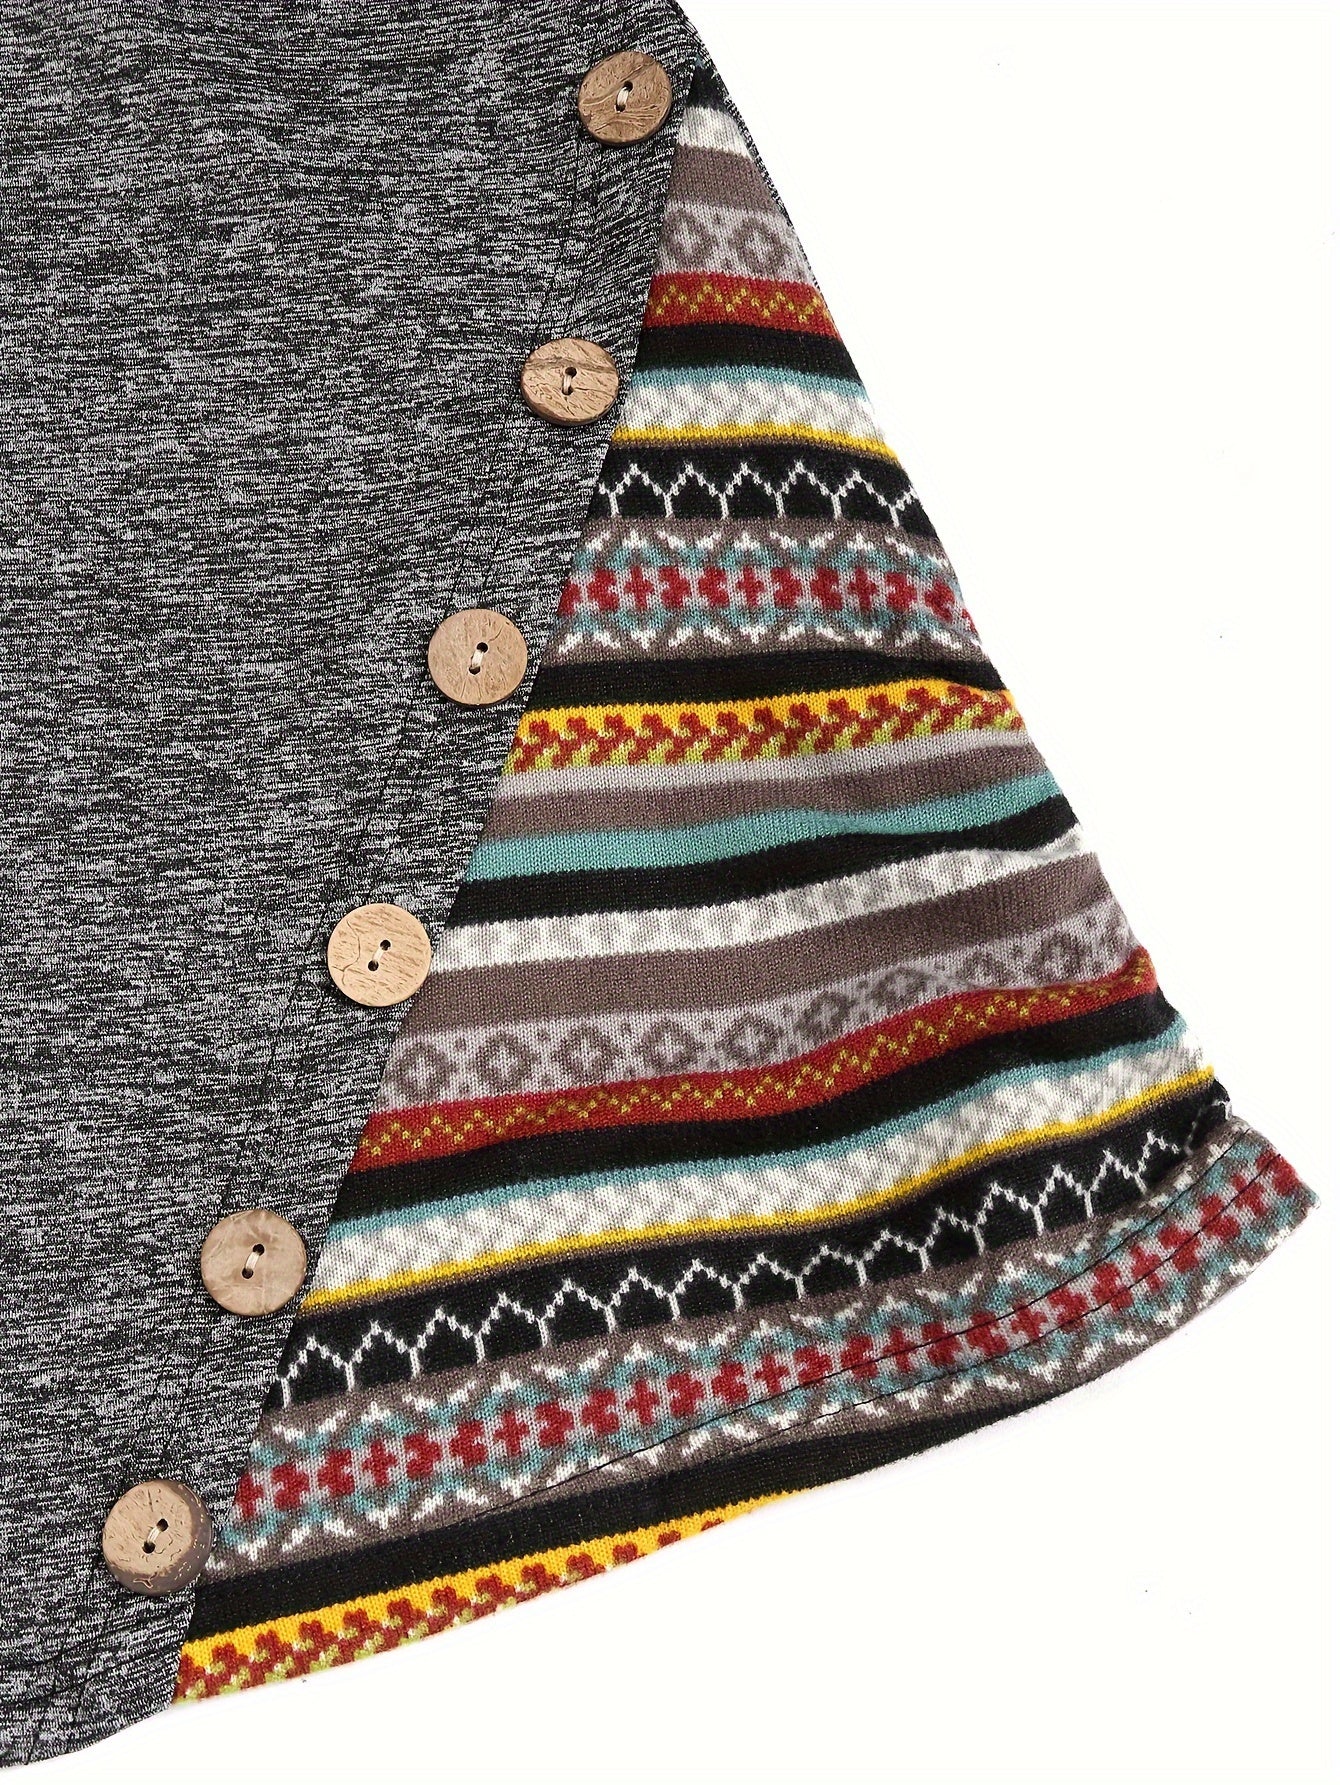 A close-up of a fabric panel in a casual skirt, featuring wooden buttons on a grey woven polyester fabric on the left, and a colorful, geometric-patterned fabric with stripes of various colors on the right from Maramalive™, showcasing their Plus Size Retro Top, Women's Plus Colorblock Geometric Print Hooded Long Sleeve Button Decor Slim Fit Slight Stretch Top.